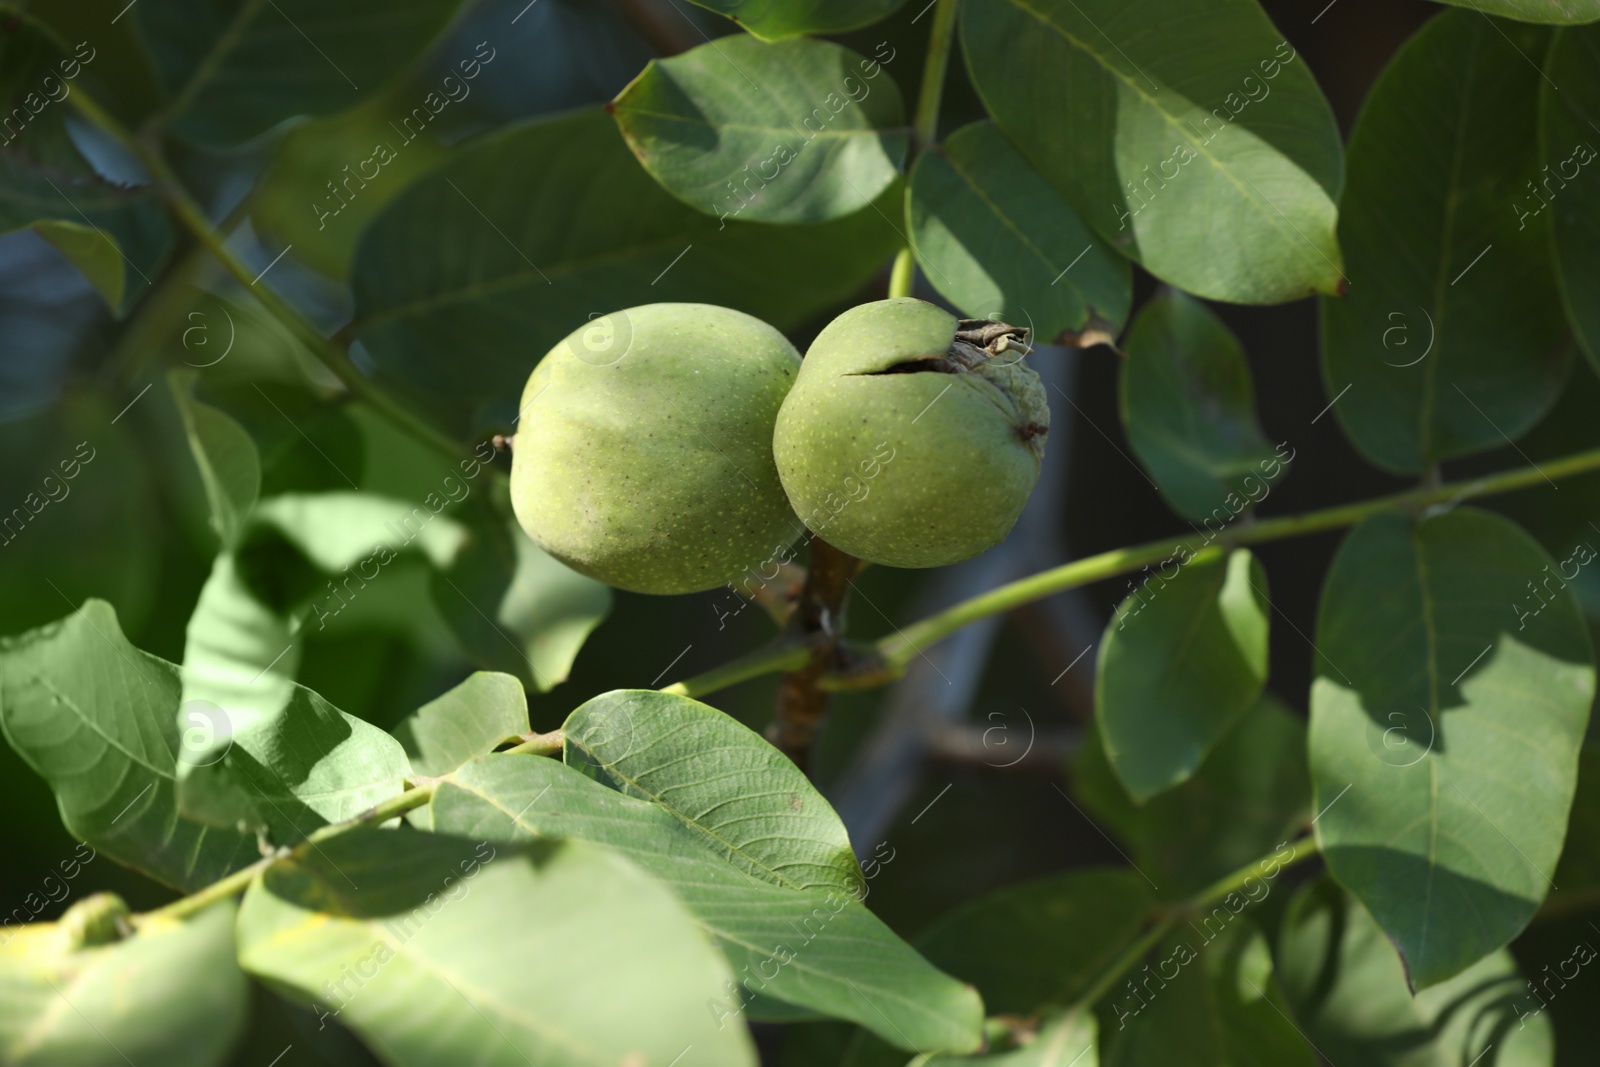 Photo of Ripe walnuts in husks growing on tree outdoors, closeup view